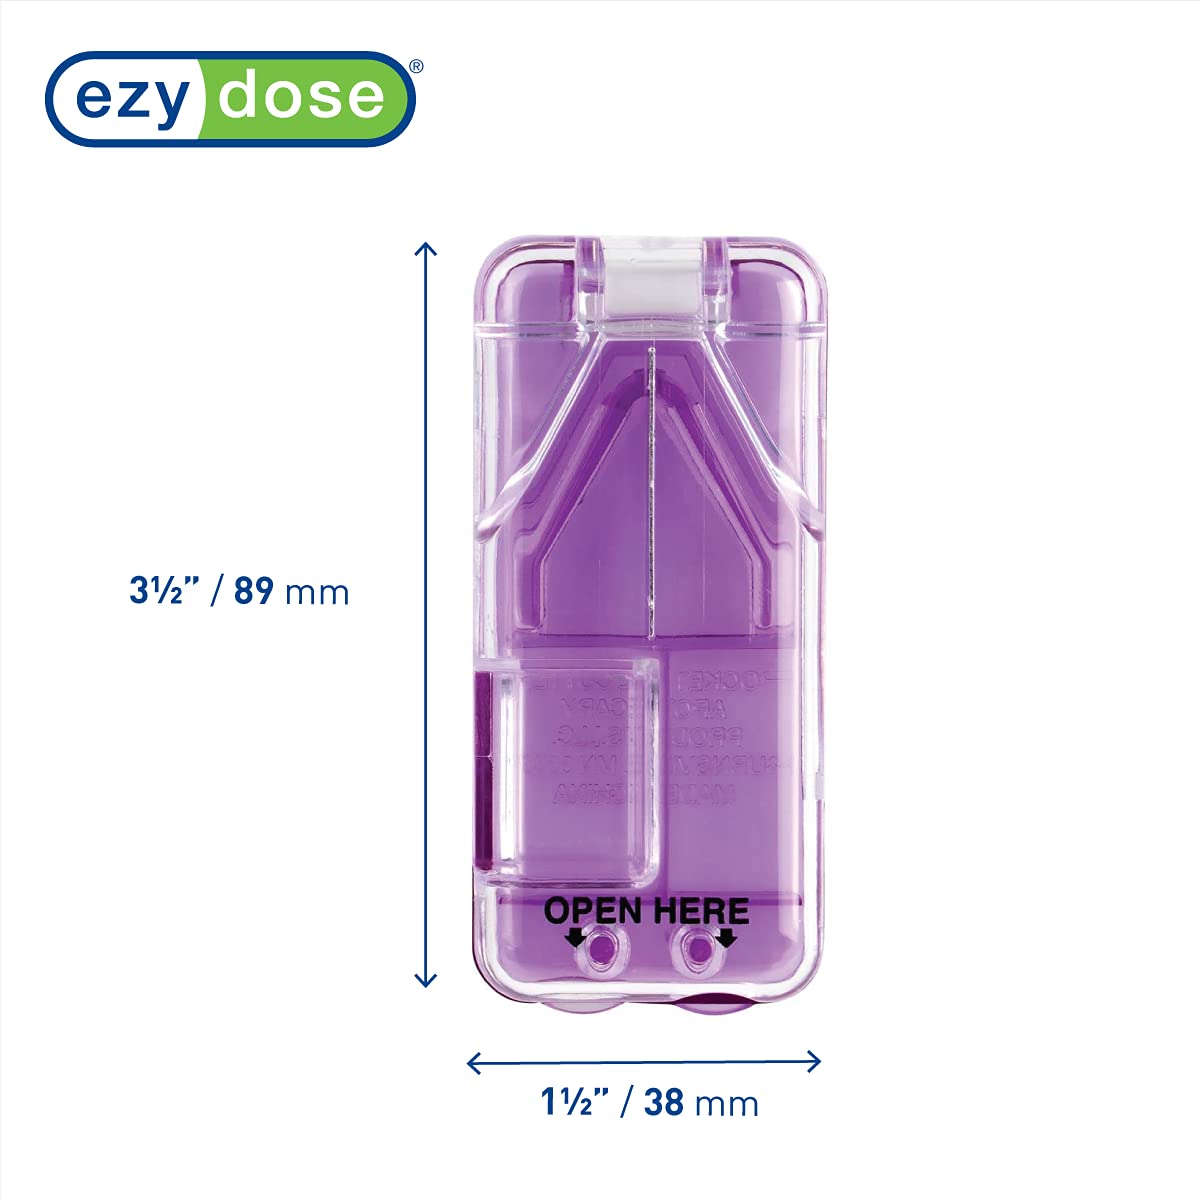 Ezy Dose Pill Cutter and Splitter with Dispenser, Cuts Pills, Vitamins, Tablets, Stainless Steel Blade, Travel Sized, Colors May Vary